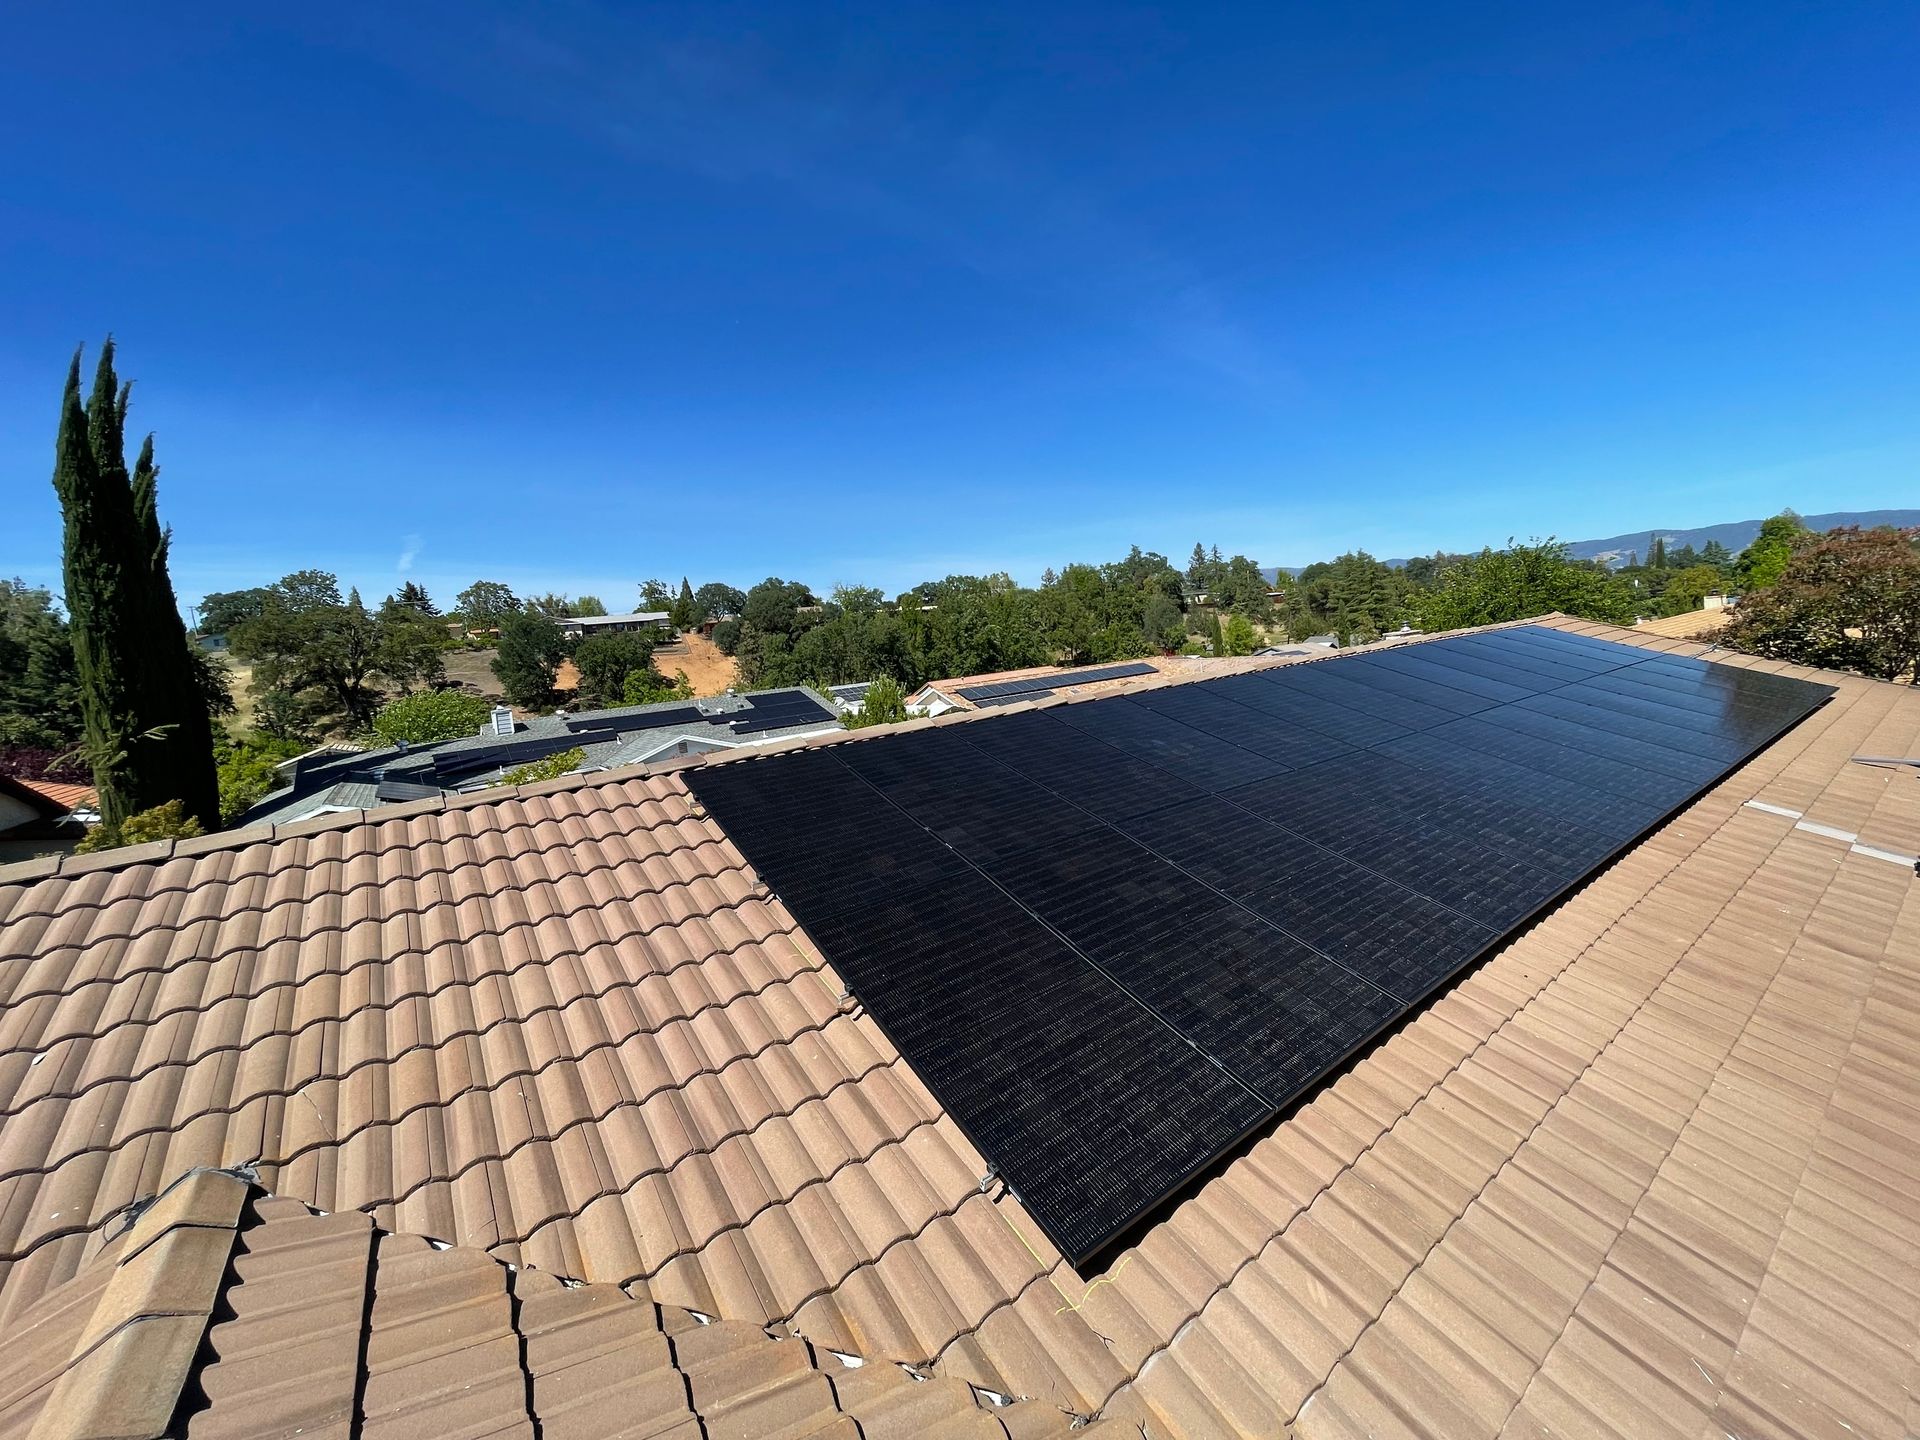 What is a Solar Power Purchase Agreement (PPA)? Learn the basics of a Solar Purchase Agreement here.